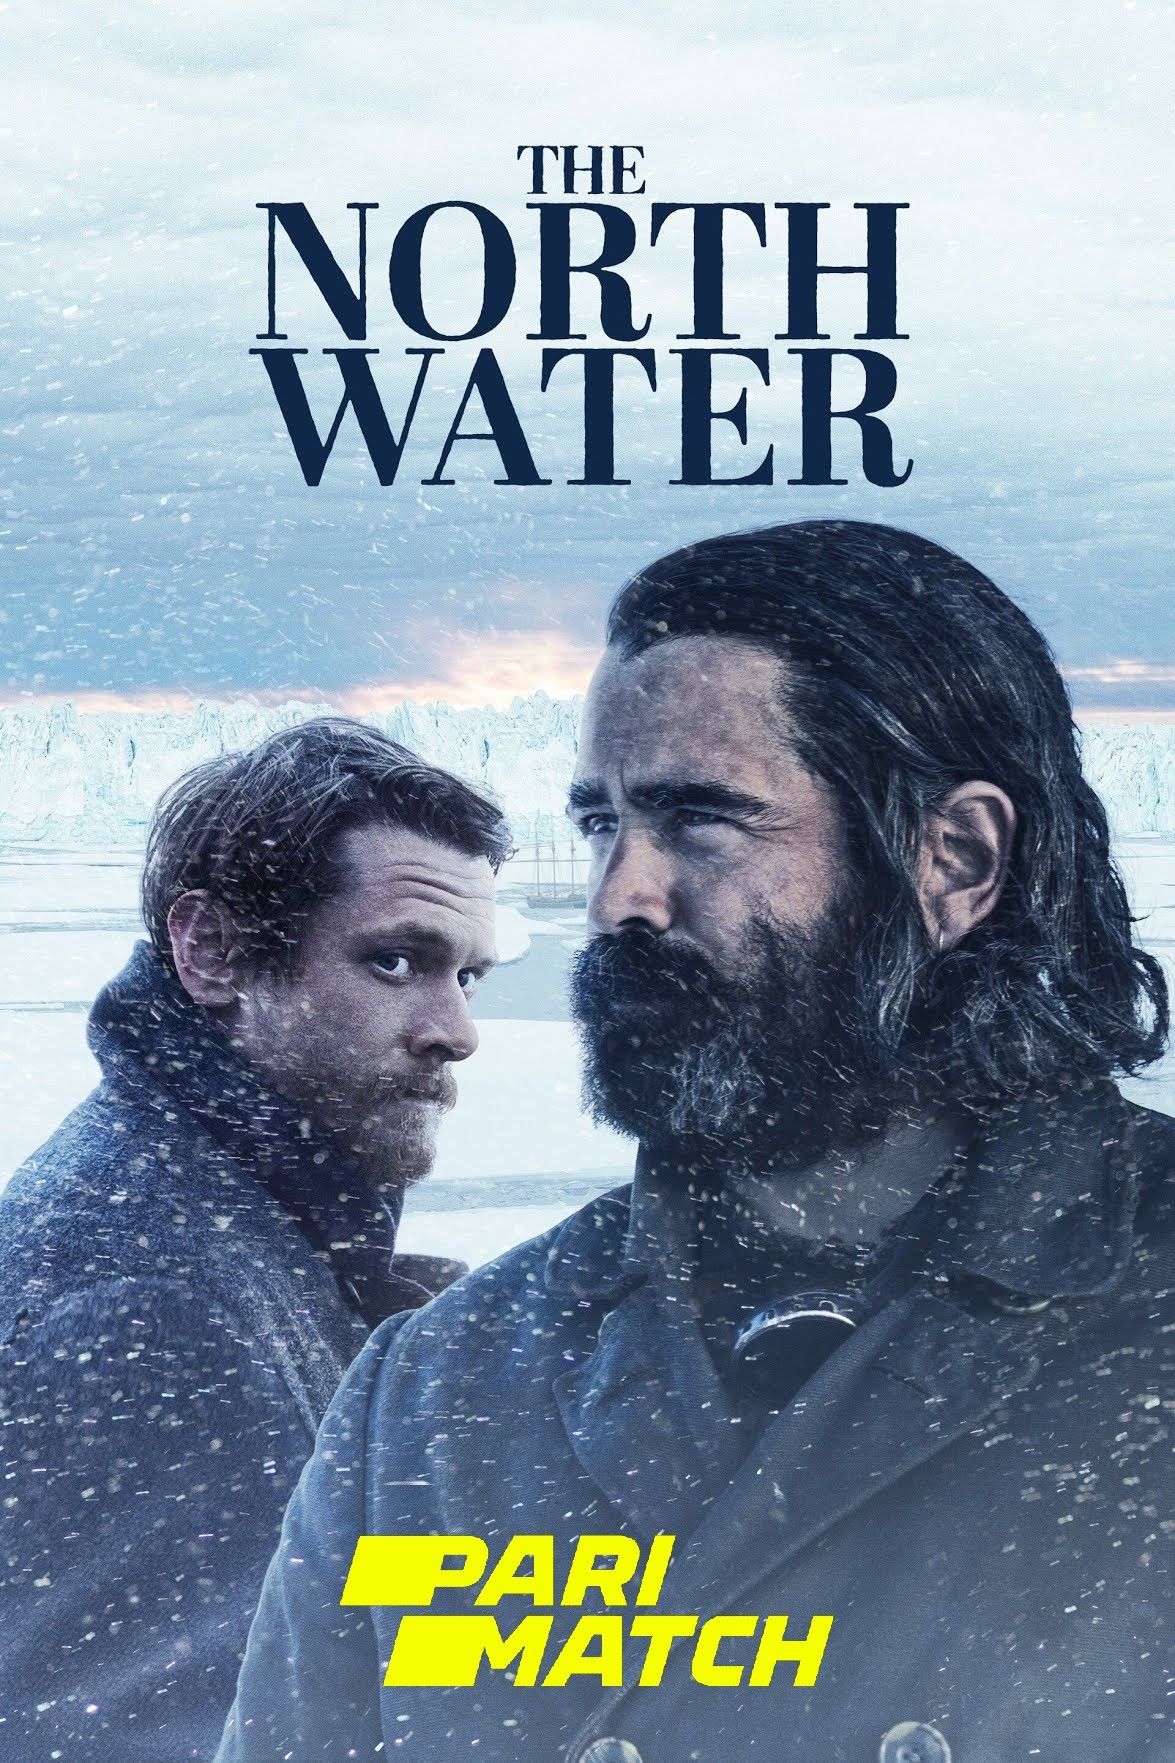 The North Water: Season 1 (2021) (Episode 2) Hindi (Voice Over) Dubbed TV Series download full movie